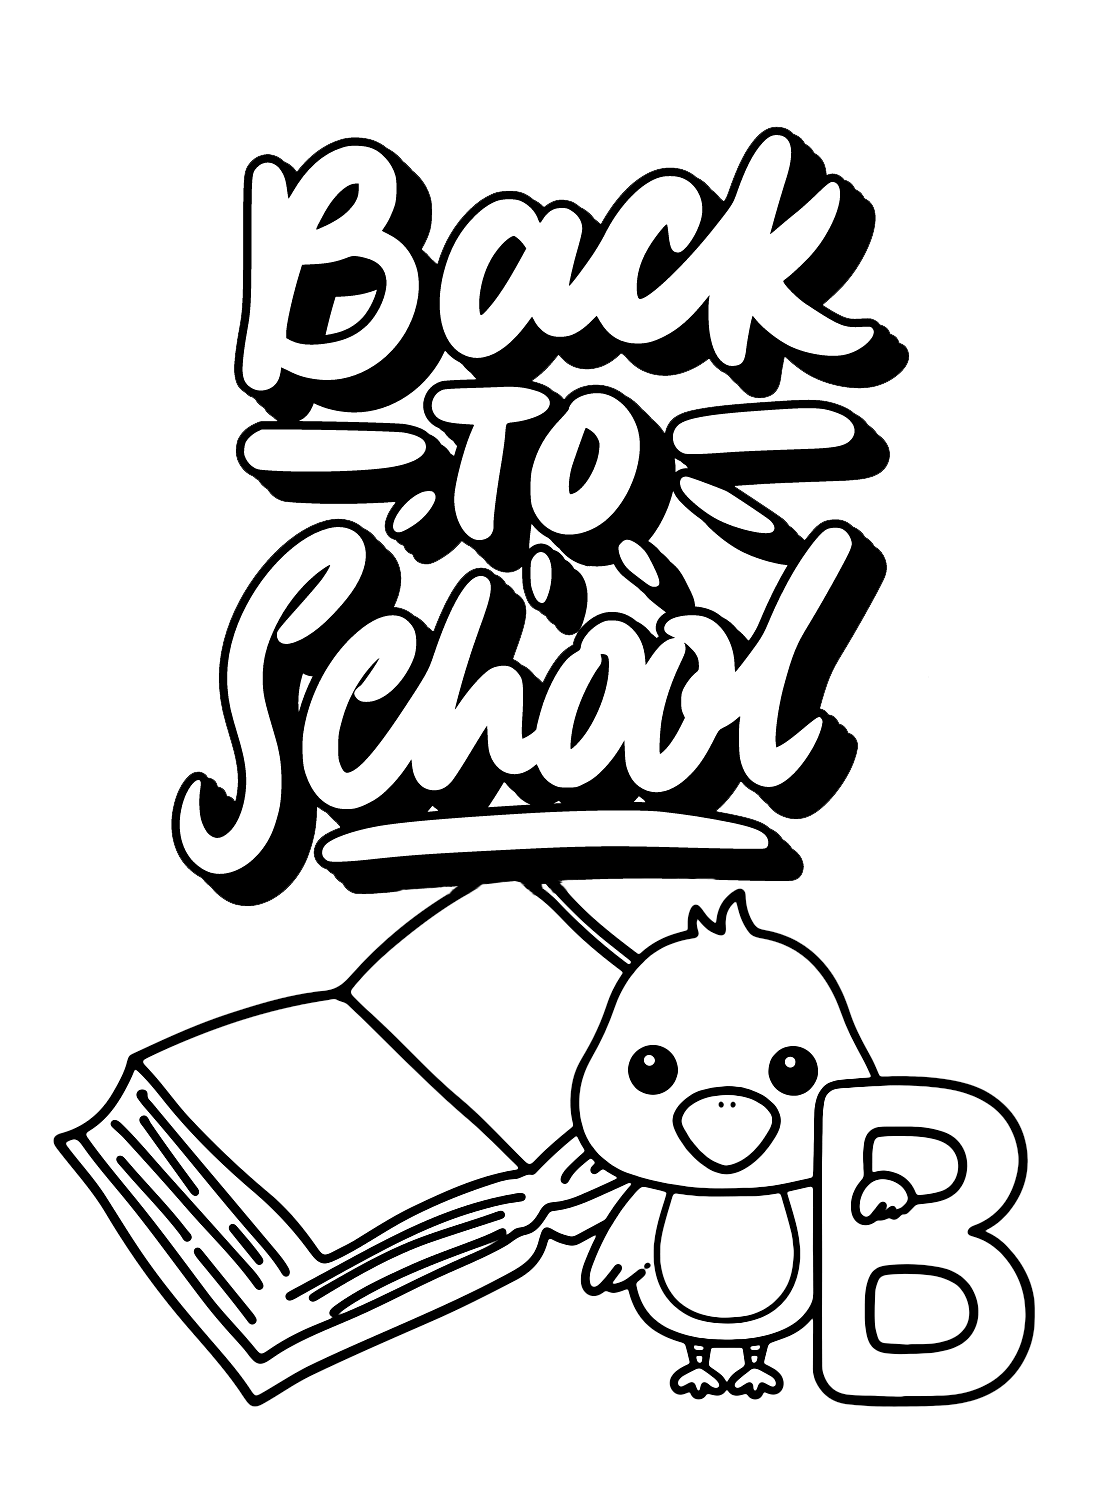 Coloring Sheet Back to School